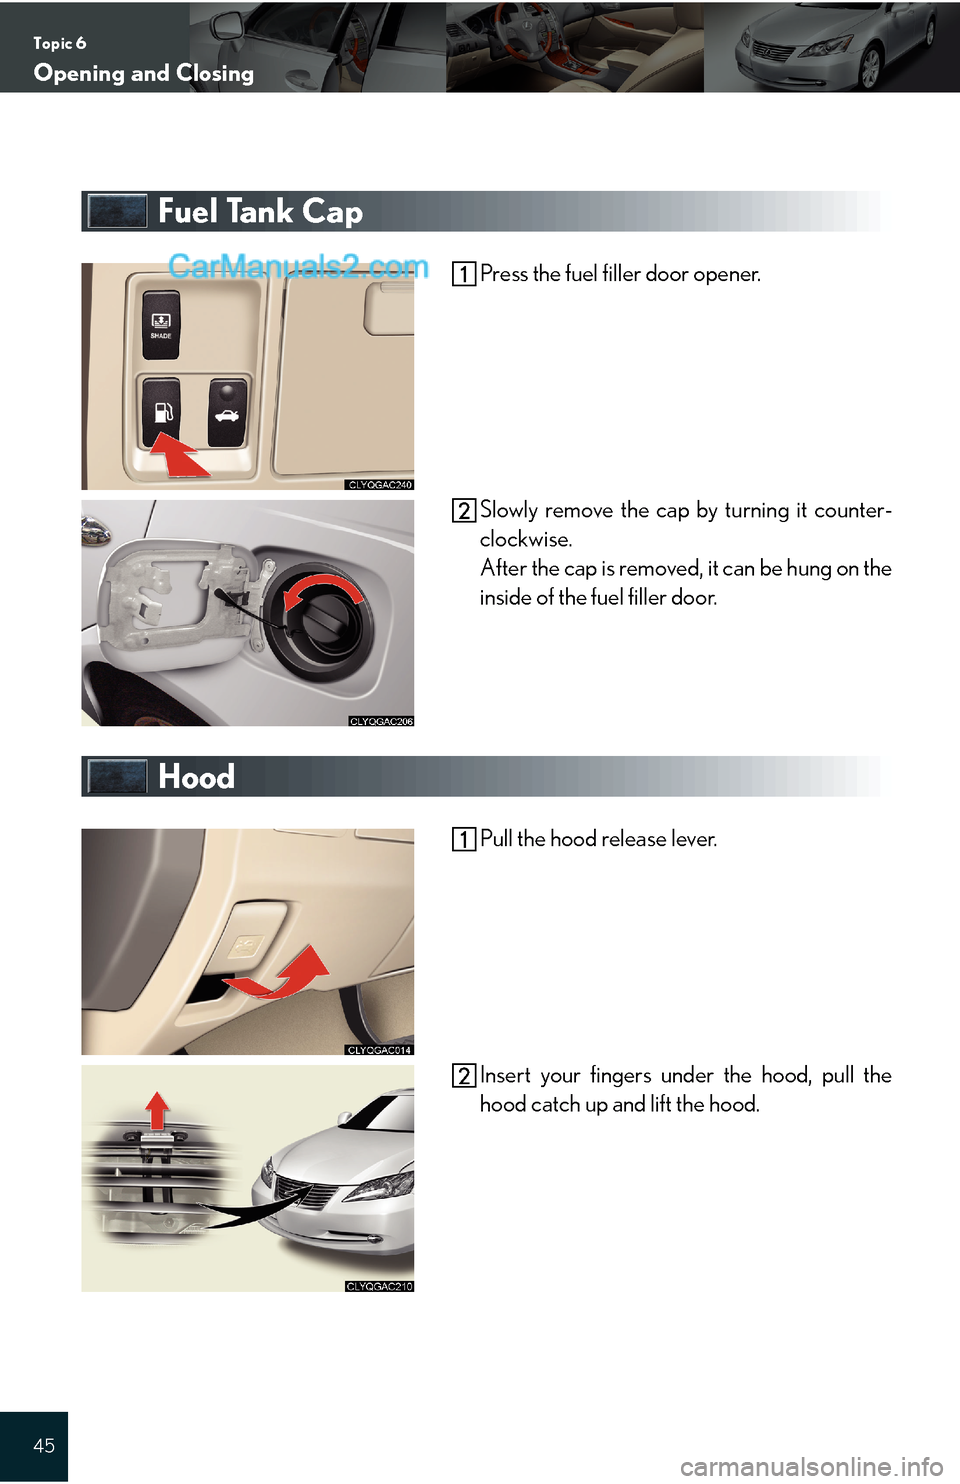 Lexus ES350 2009  Opening and Closing Topic 6
Opening and Closing
45
Fuel Tank Cap
Press the fuel filler door opener.
Slowly remove the cap by turning it counter-
clockwise.
After the cap is removed, it can be hung on the
inside of the fu